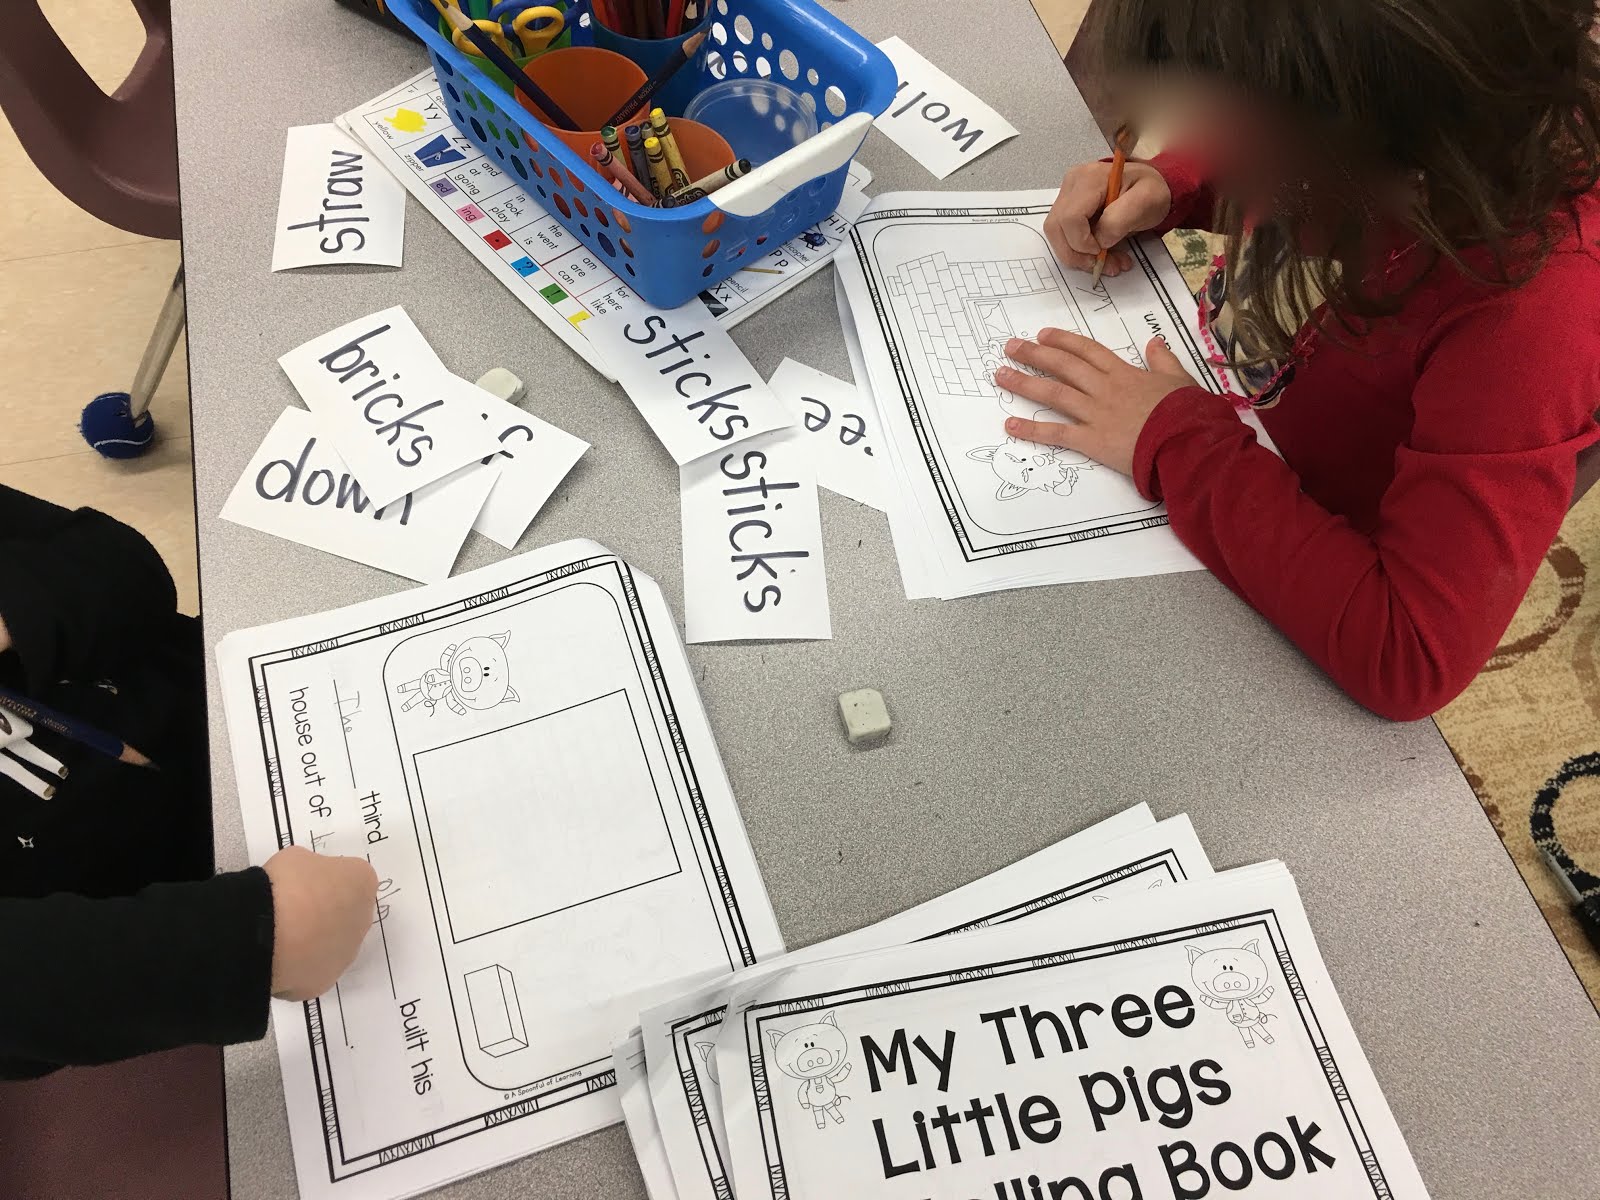 We can retell the Three Little Pigs